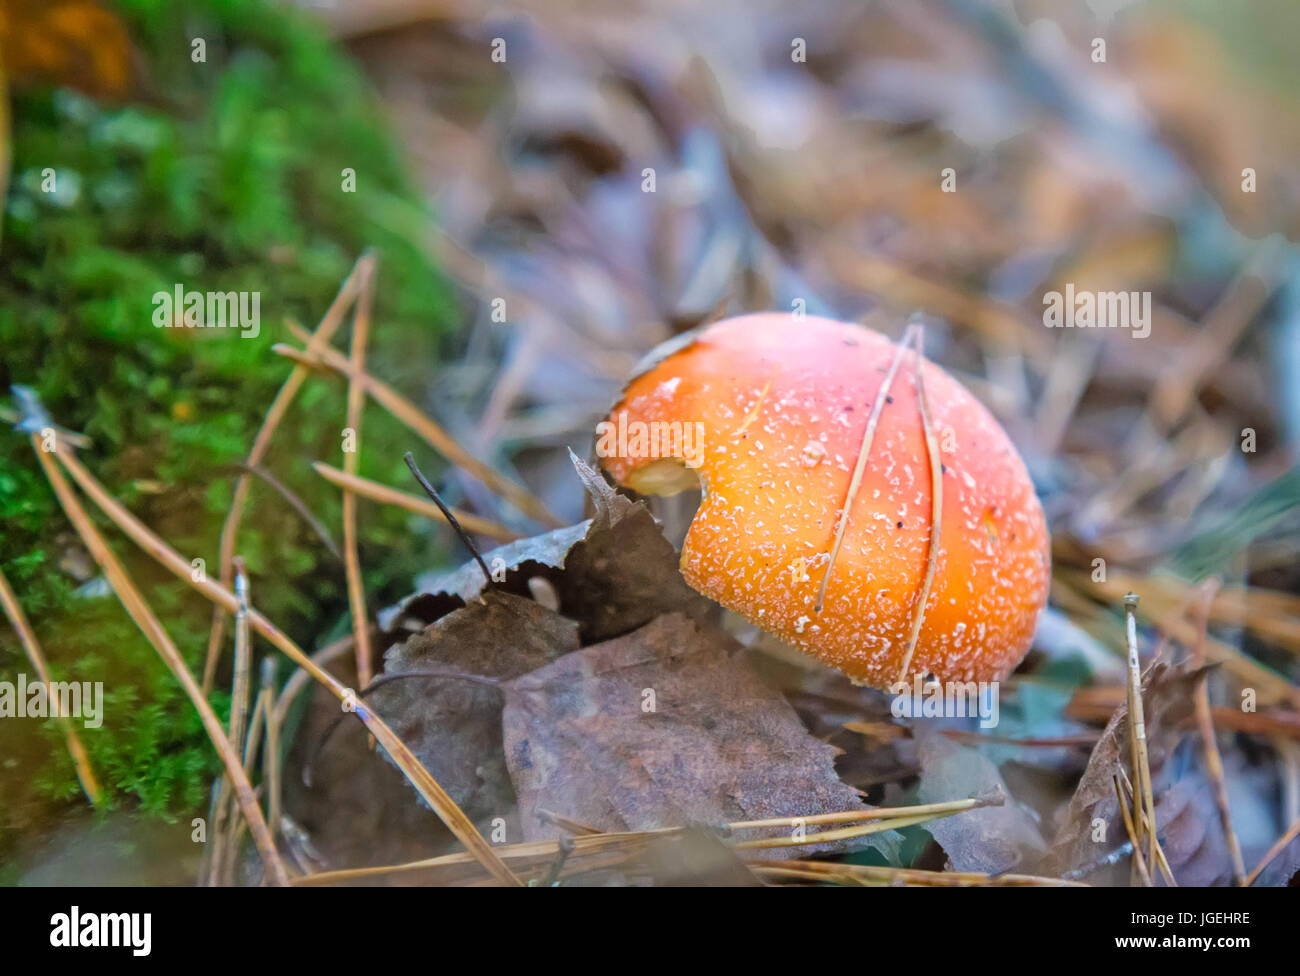 Among the green moss and fallen leaves grow beautiful red poisonous mushroom amanita. Stock Photo